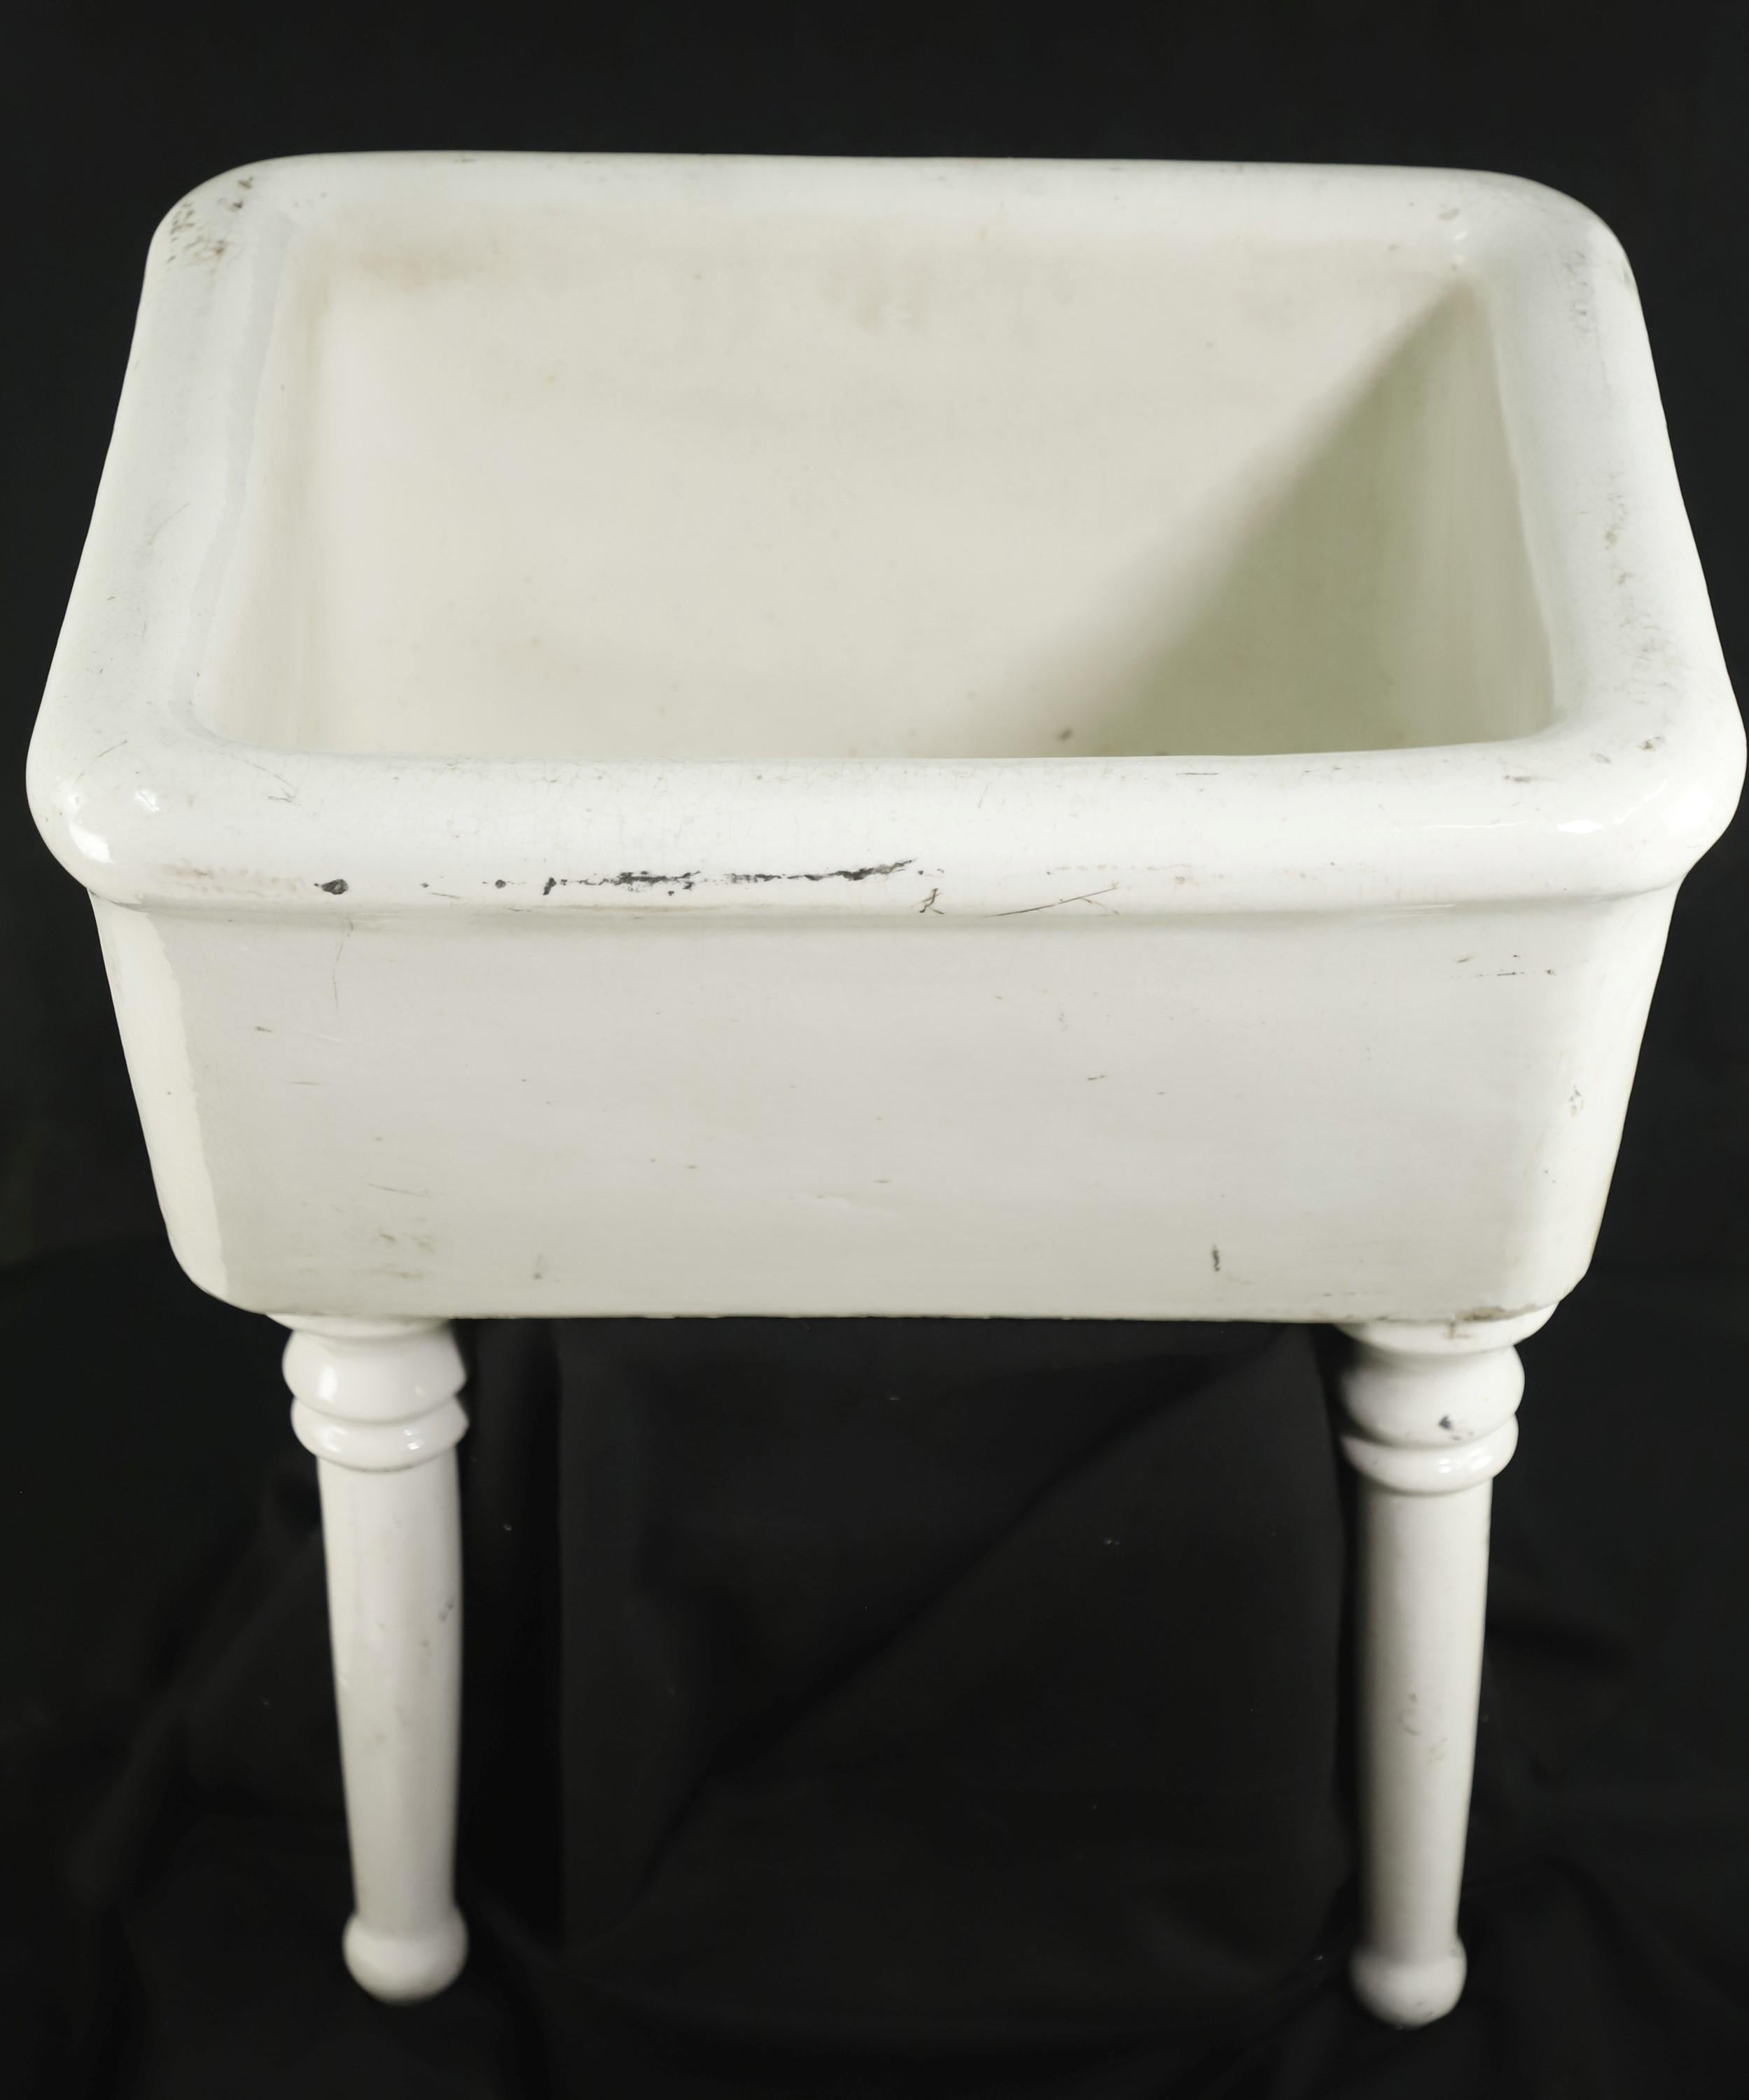 Early 20th Century large white earthenware wall mount slop sink supported by two front legs. Please note, this item is located in our Scranton, PA location.